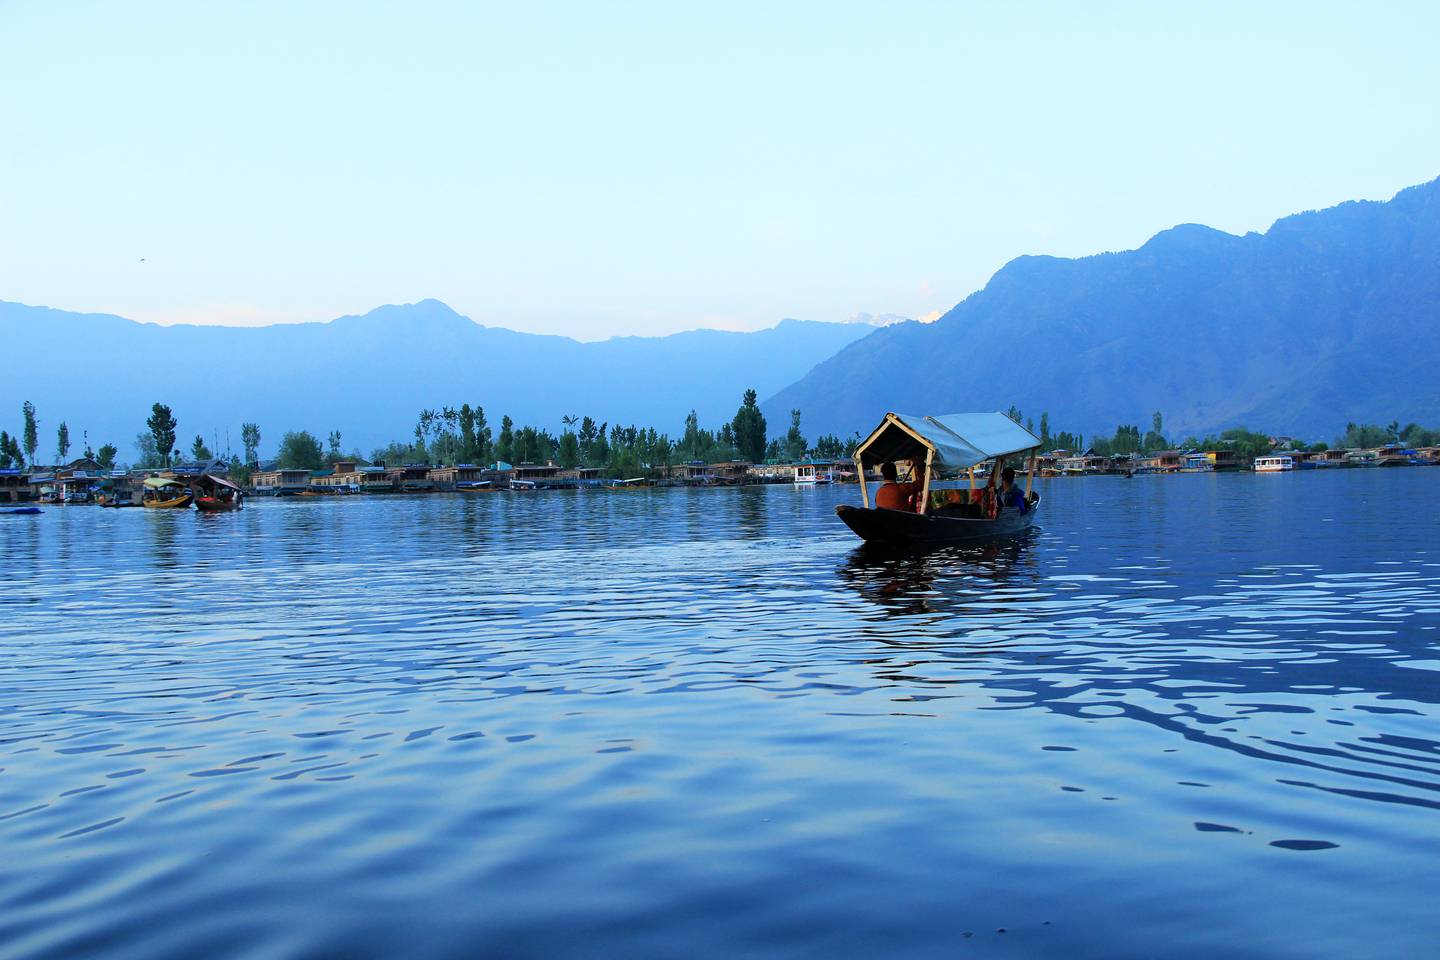 Bollywood’s love affair with Kashmir started in the 1960s when Shammi Kapoor cavorted in the midst of Dal Lake. Photo: Amit Jain / Unsplash